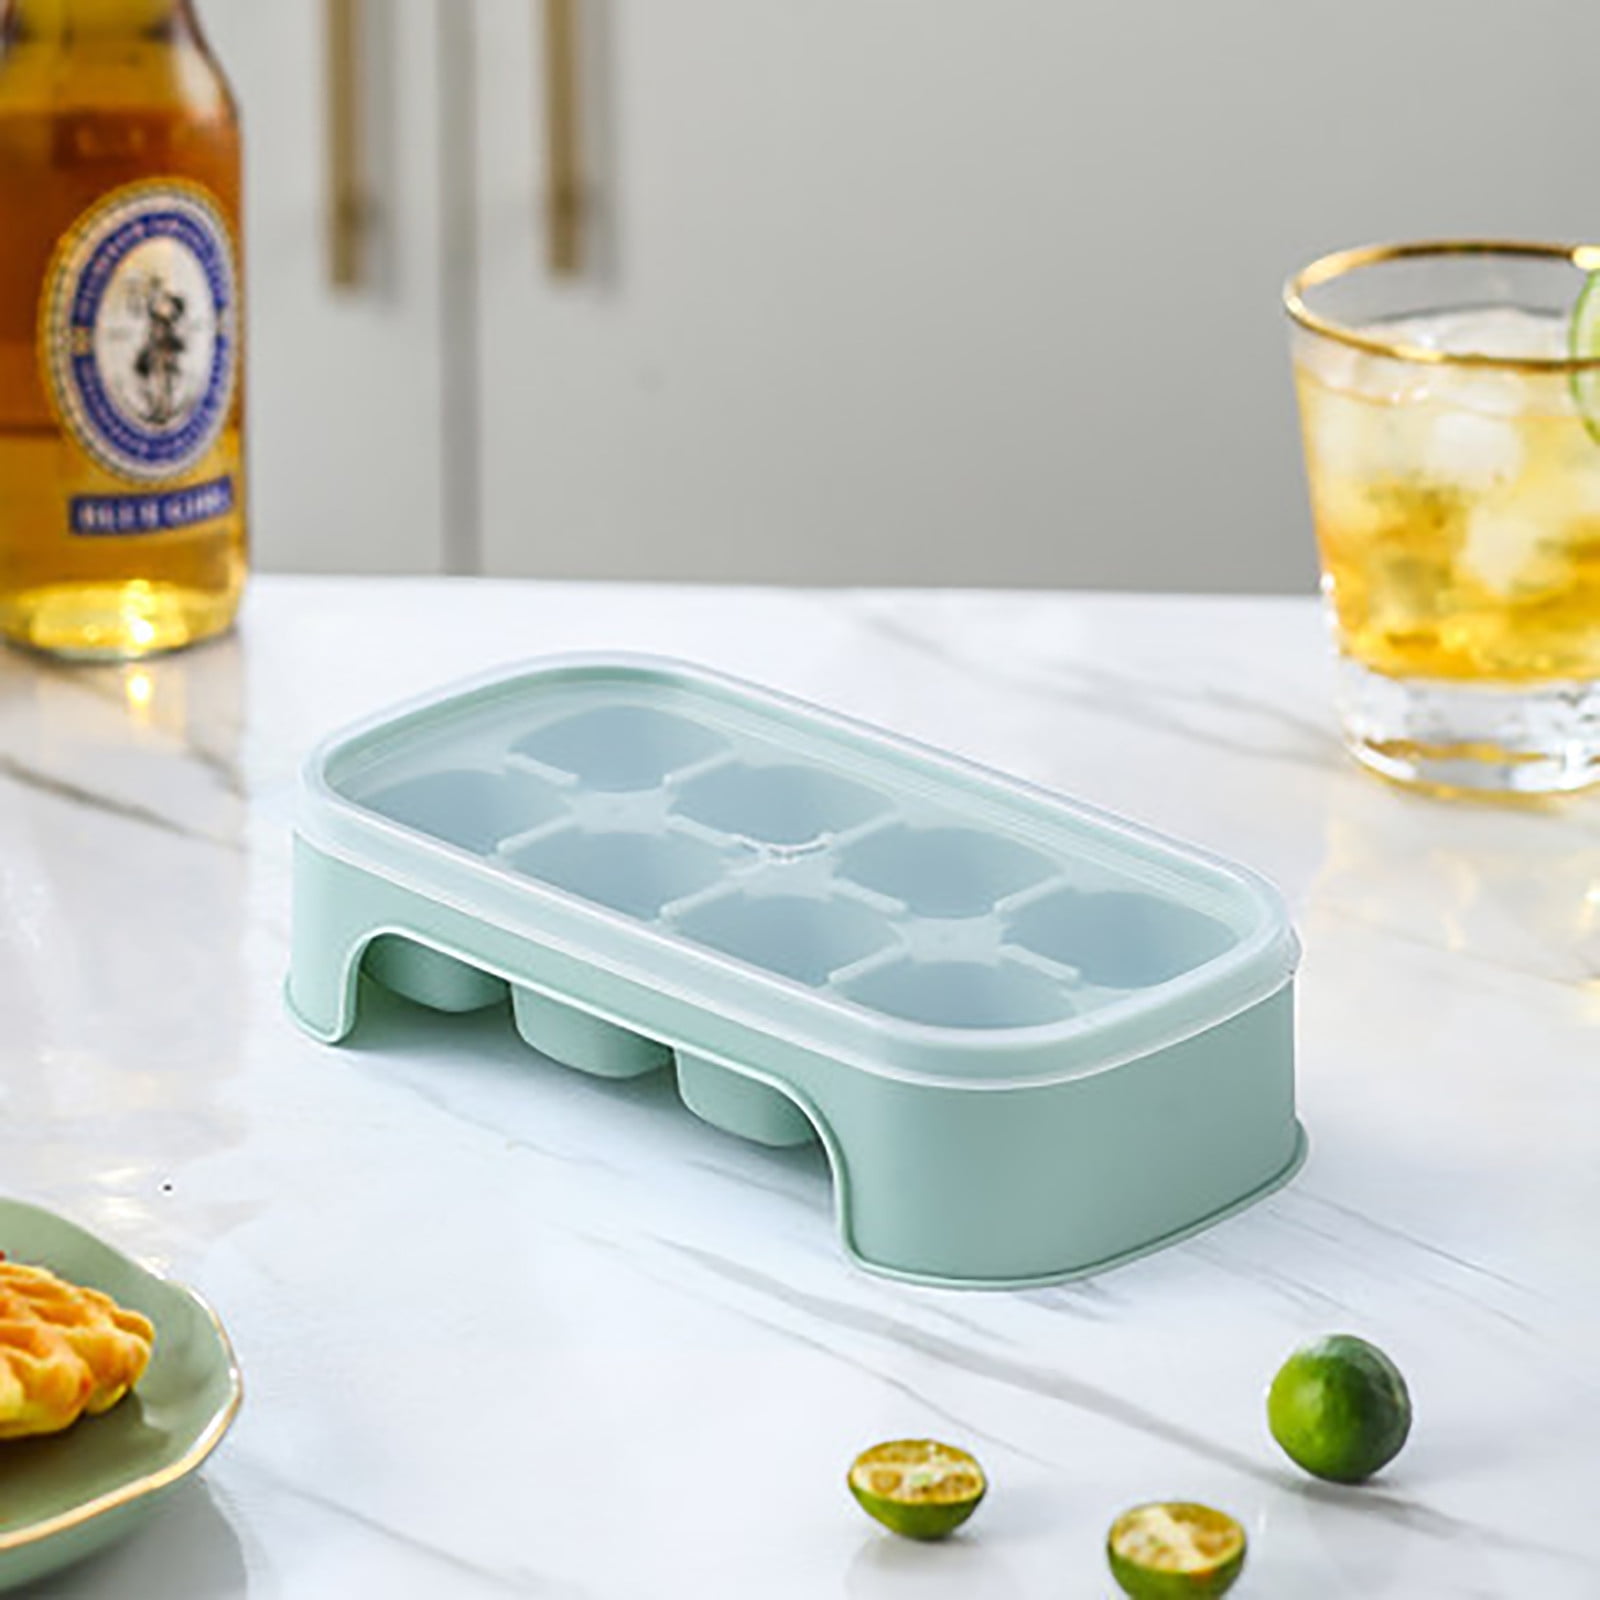 Mini Ice Maker Cup, Cylinder Ice Cube Mold, Small Ice Cube Tray with Lid,  Decompress Ice Lattice Molding Ice Cup Press-Type, 60 Ice Cubes Make